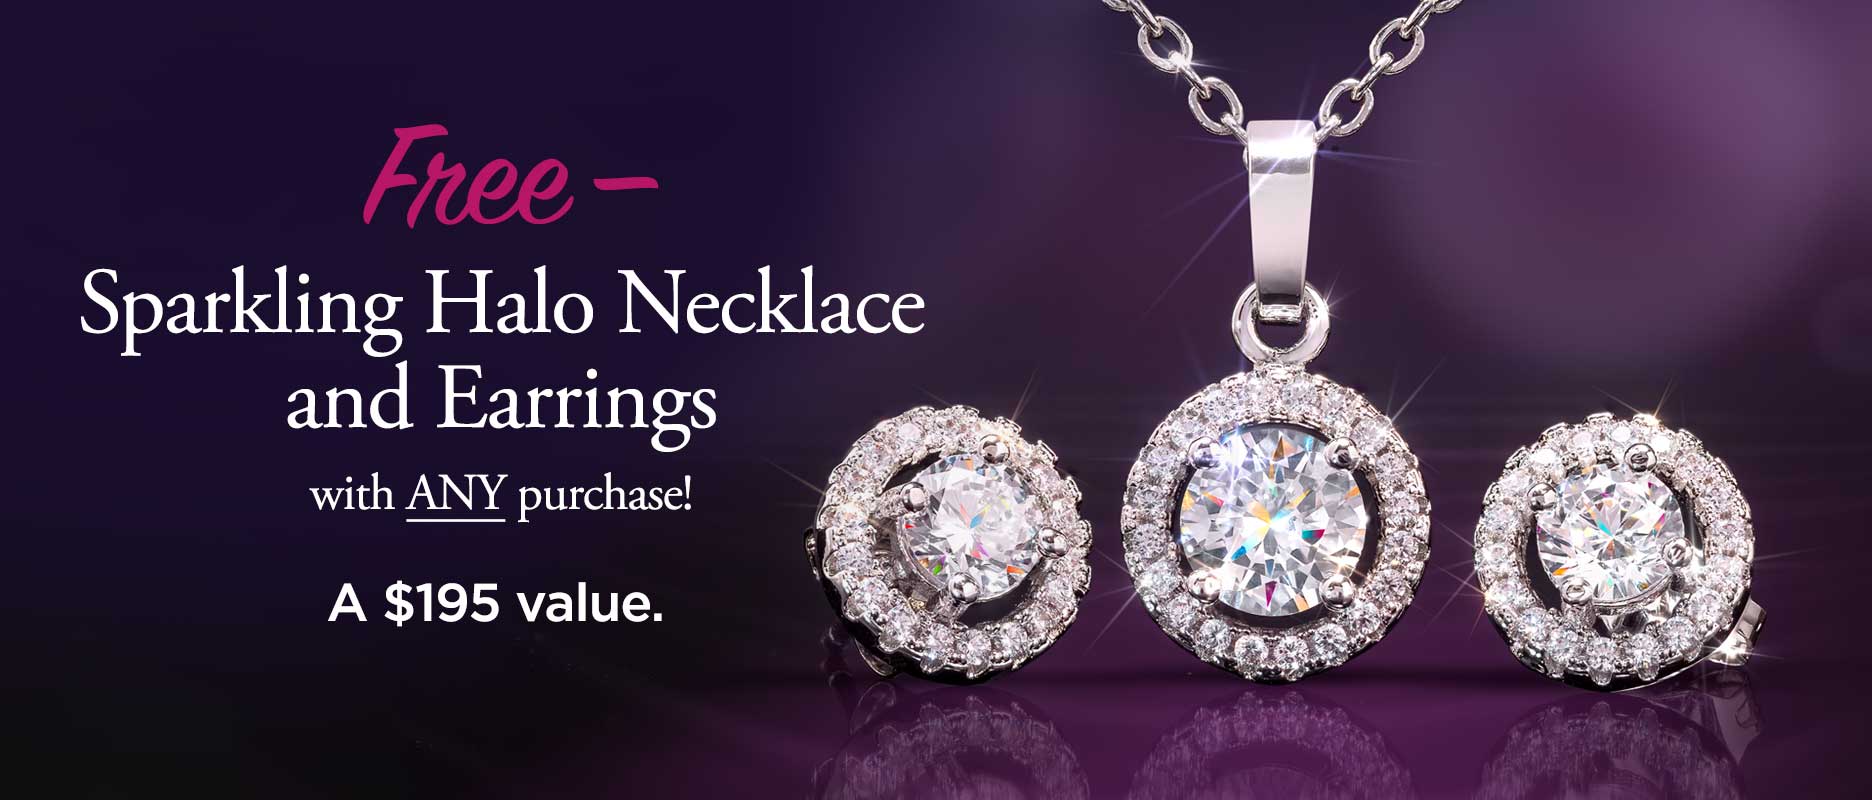 FREE Sparkling Halo Collection